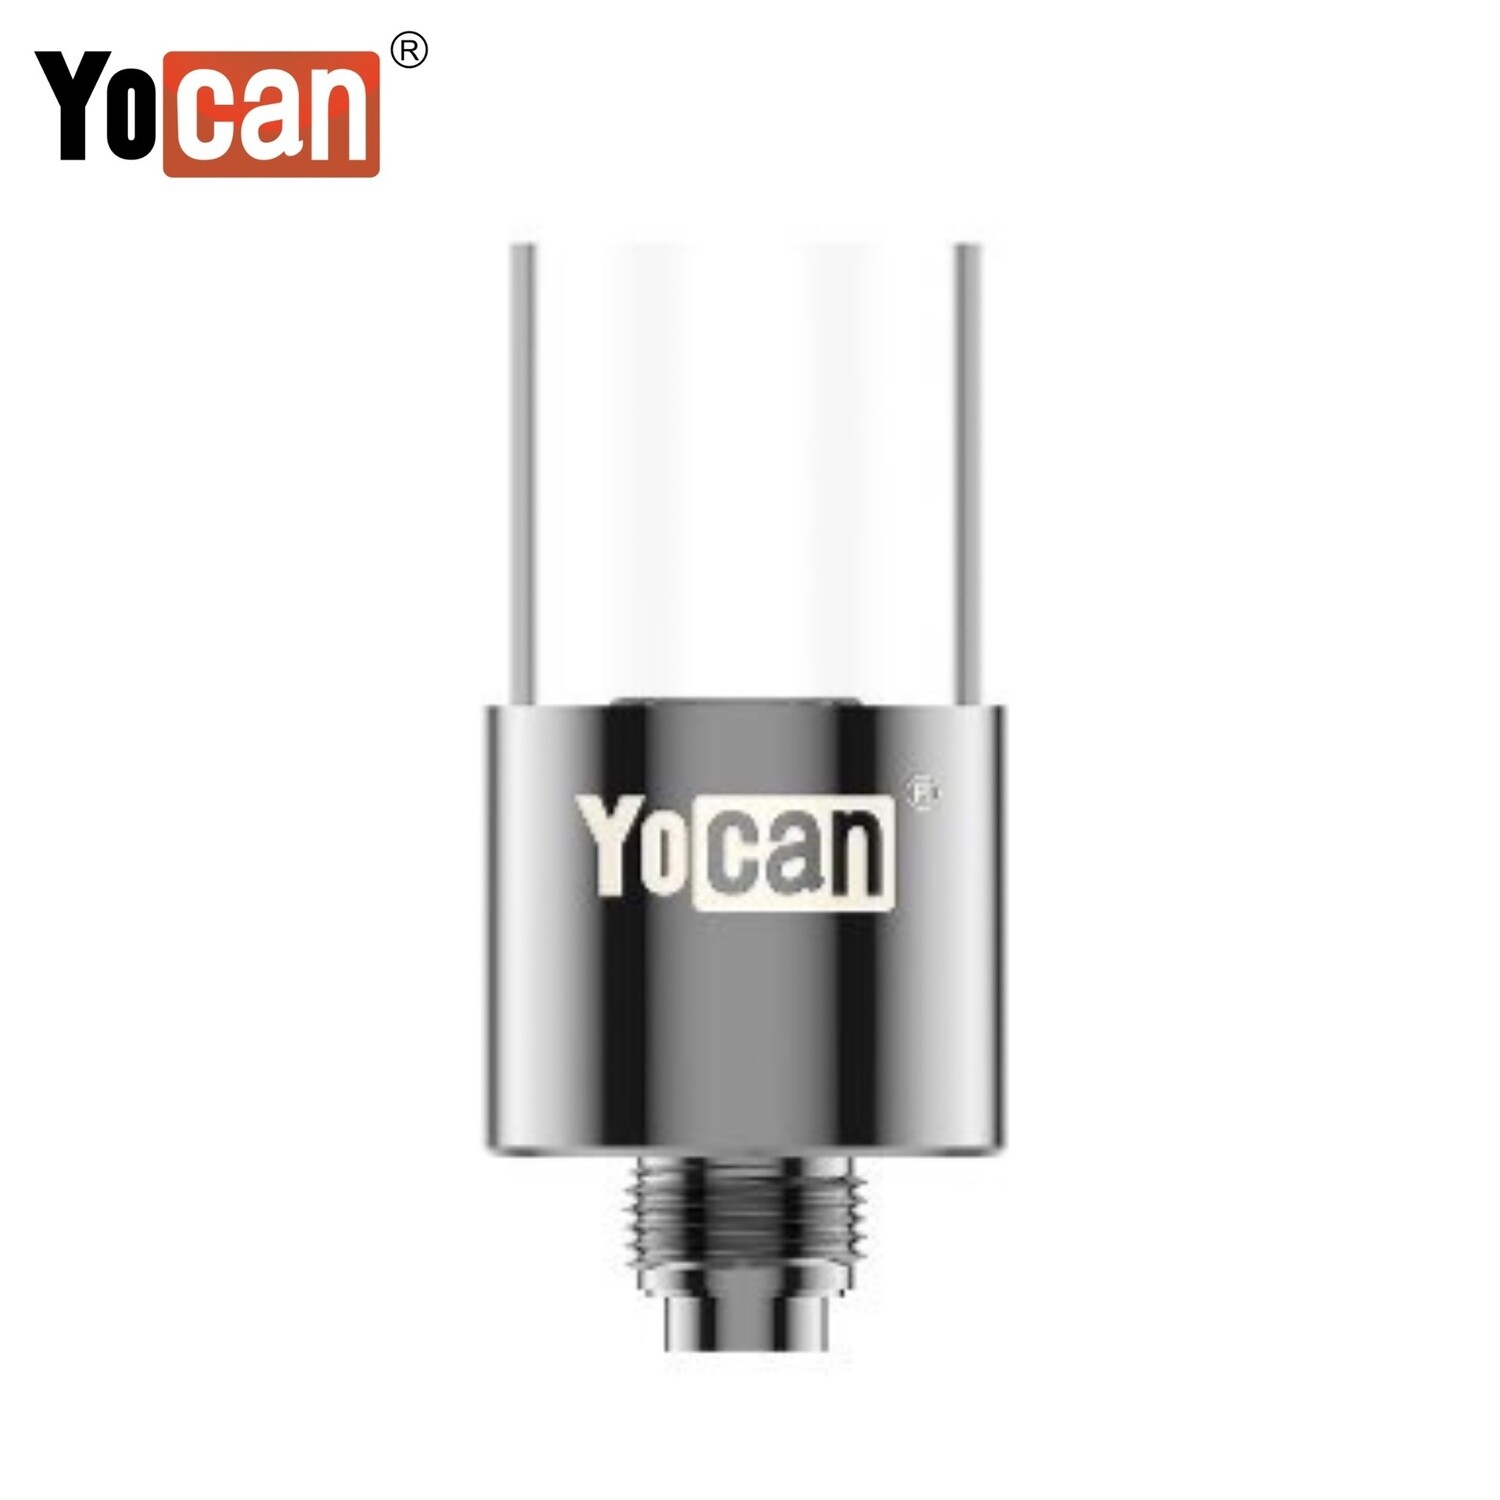 Yocan® Orbit Coil, Package Size: 5 Coils